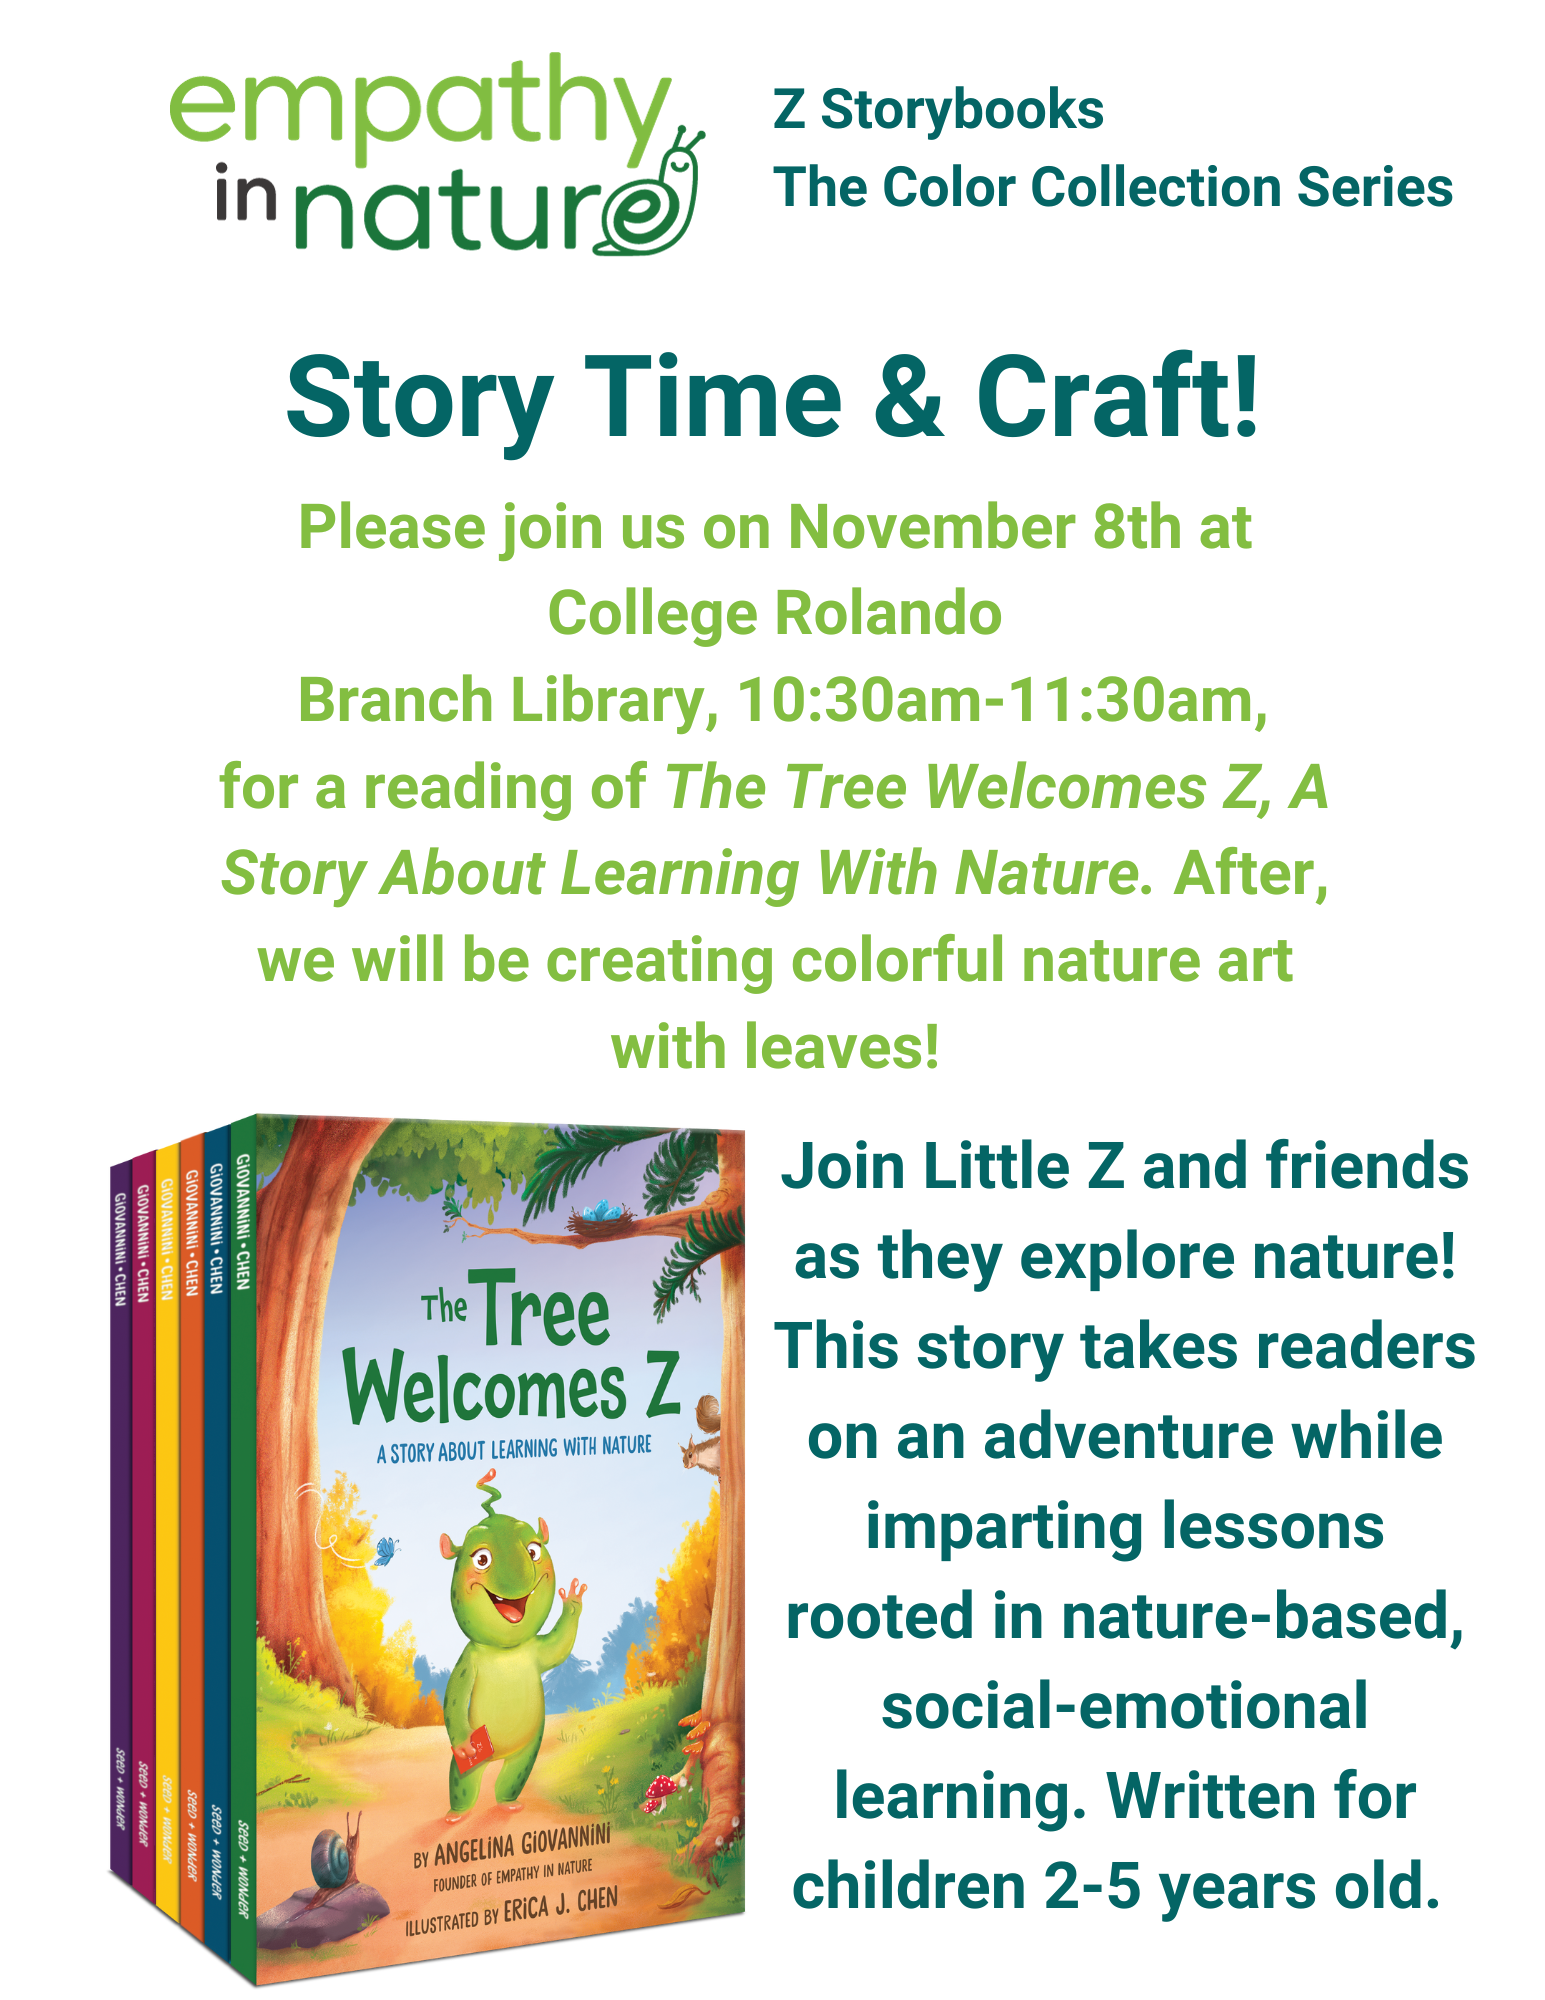 Empathy In Nature (EIN) Storytime & Craft: learn about nature and work on a colorful nature art craft. 